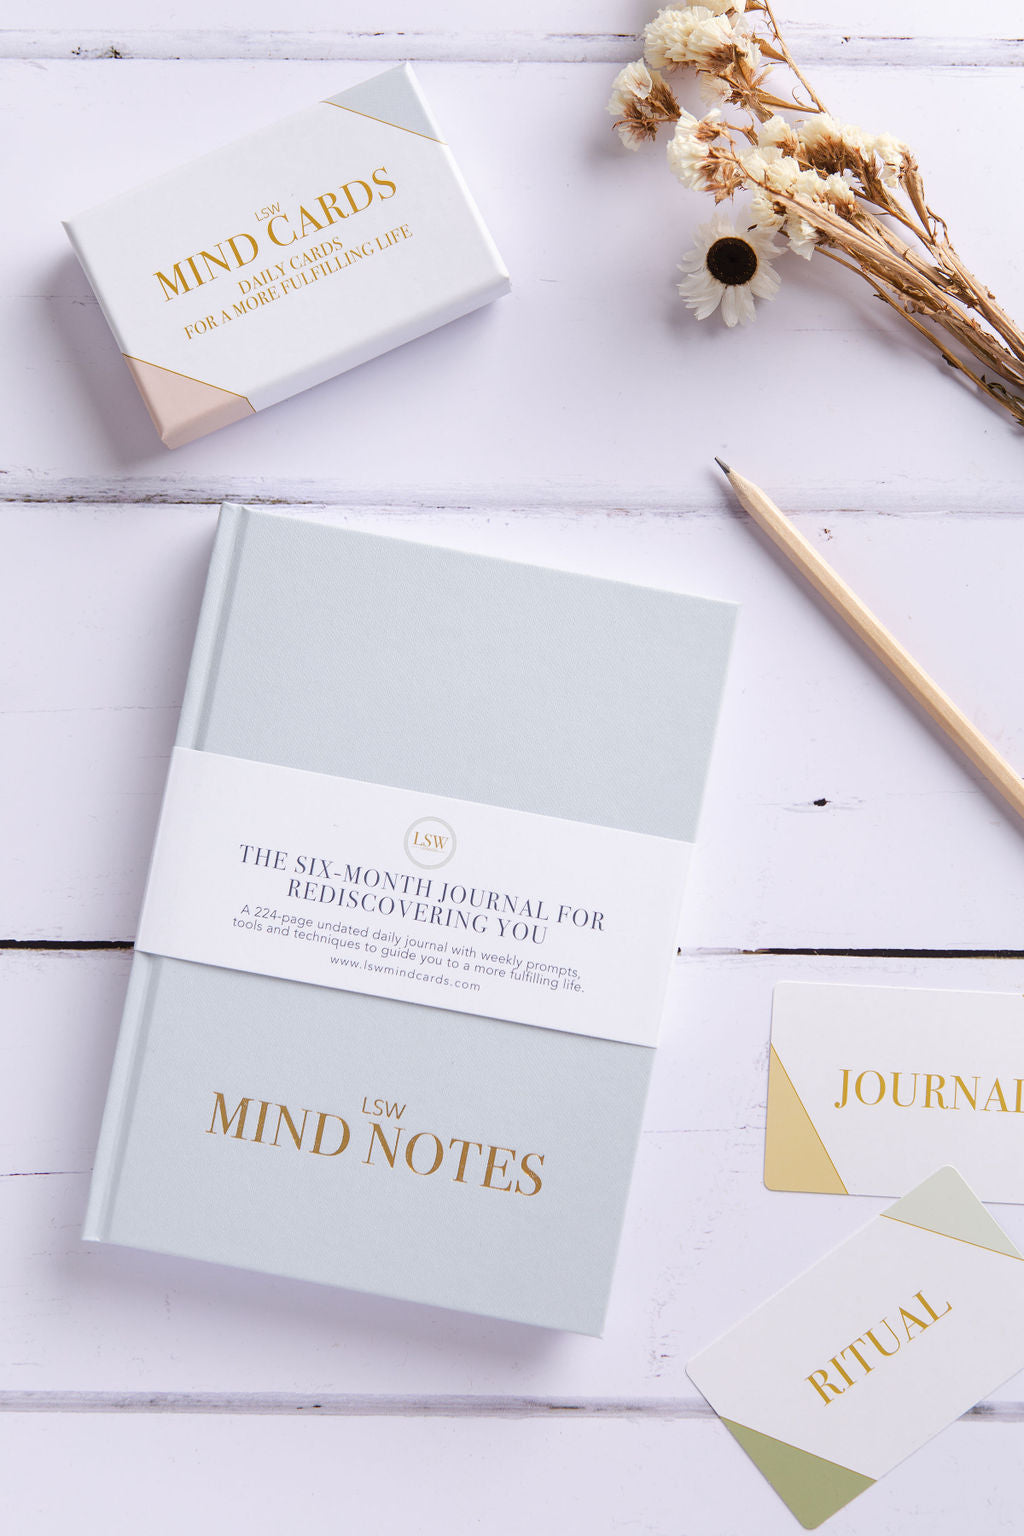 Journal agenda 'Mind Notes' undated with prompts 